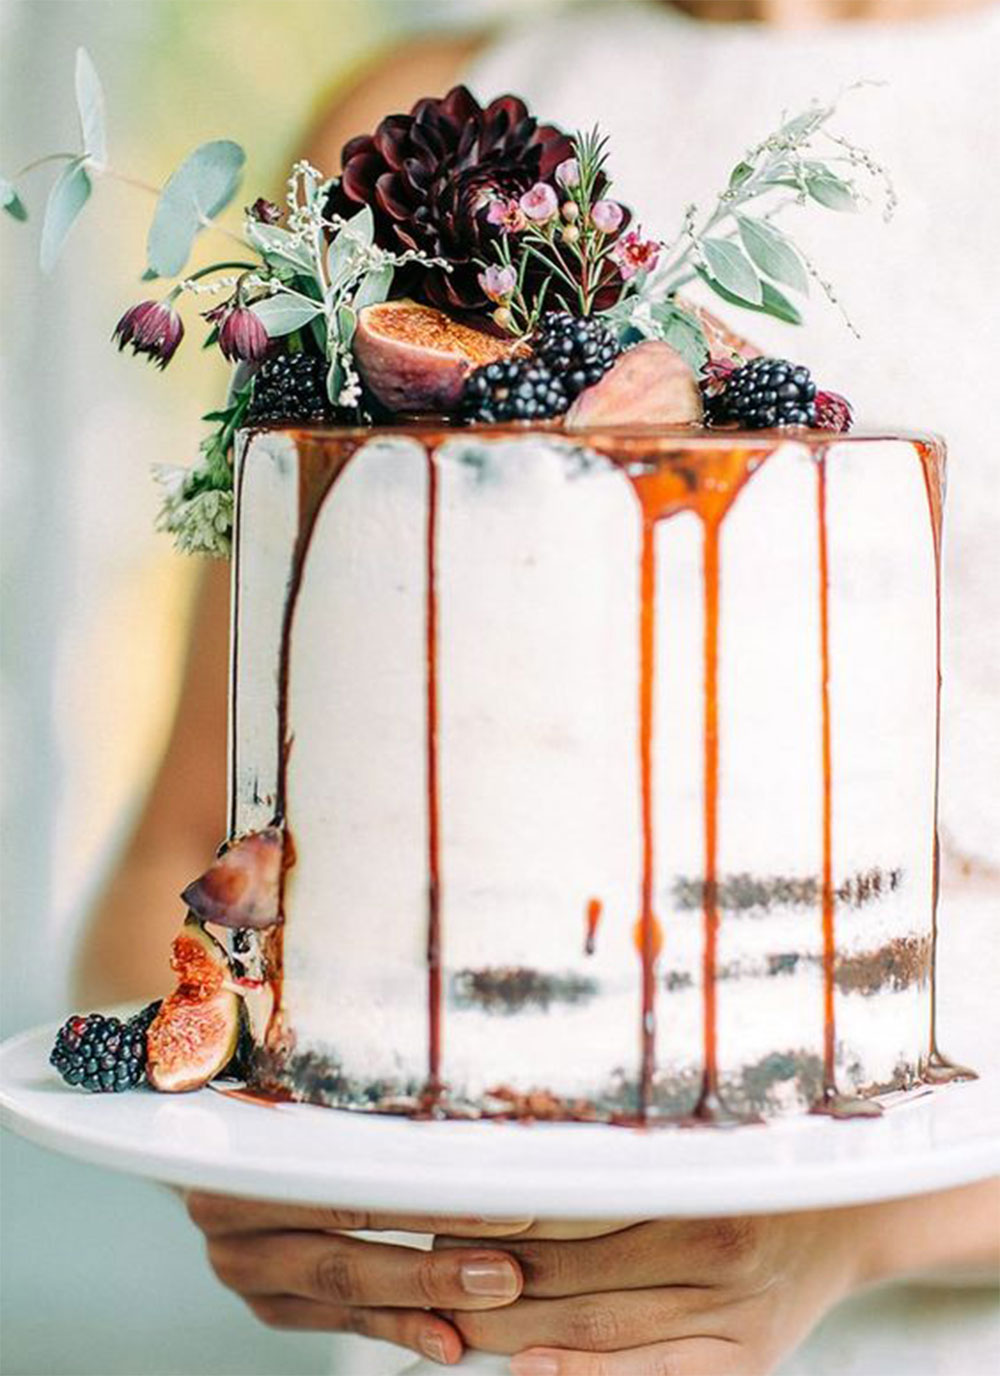 With nuptials becoming more and more personalised, the drip cake is perfect. It's both individual and highly Instagrammable, making it the obvious choice for a 2017 wedding.